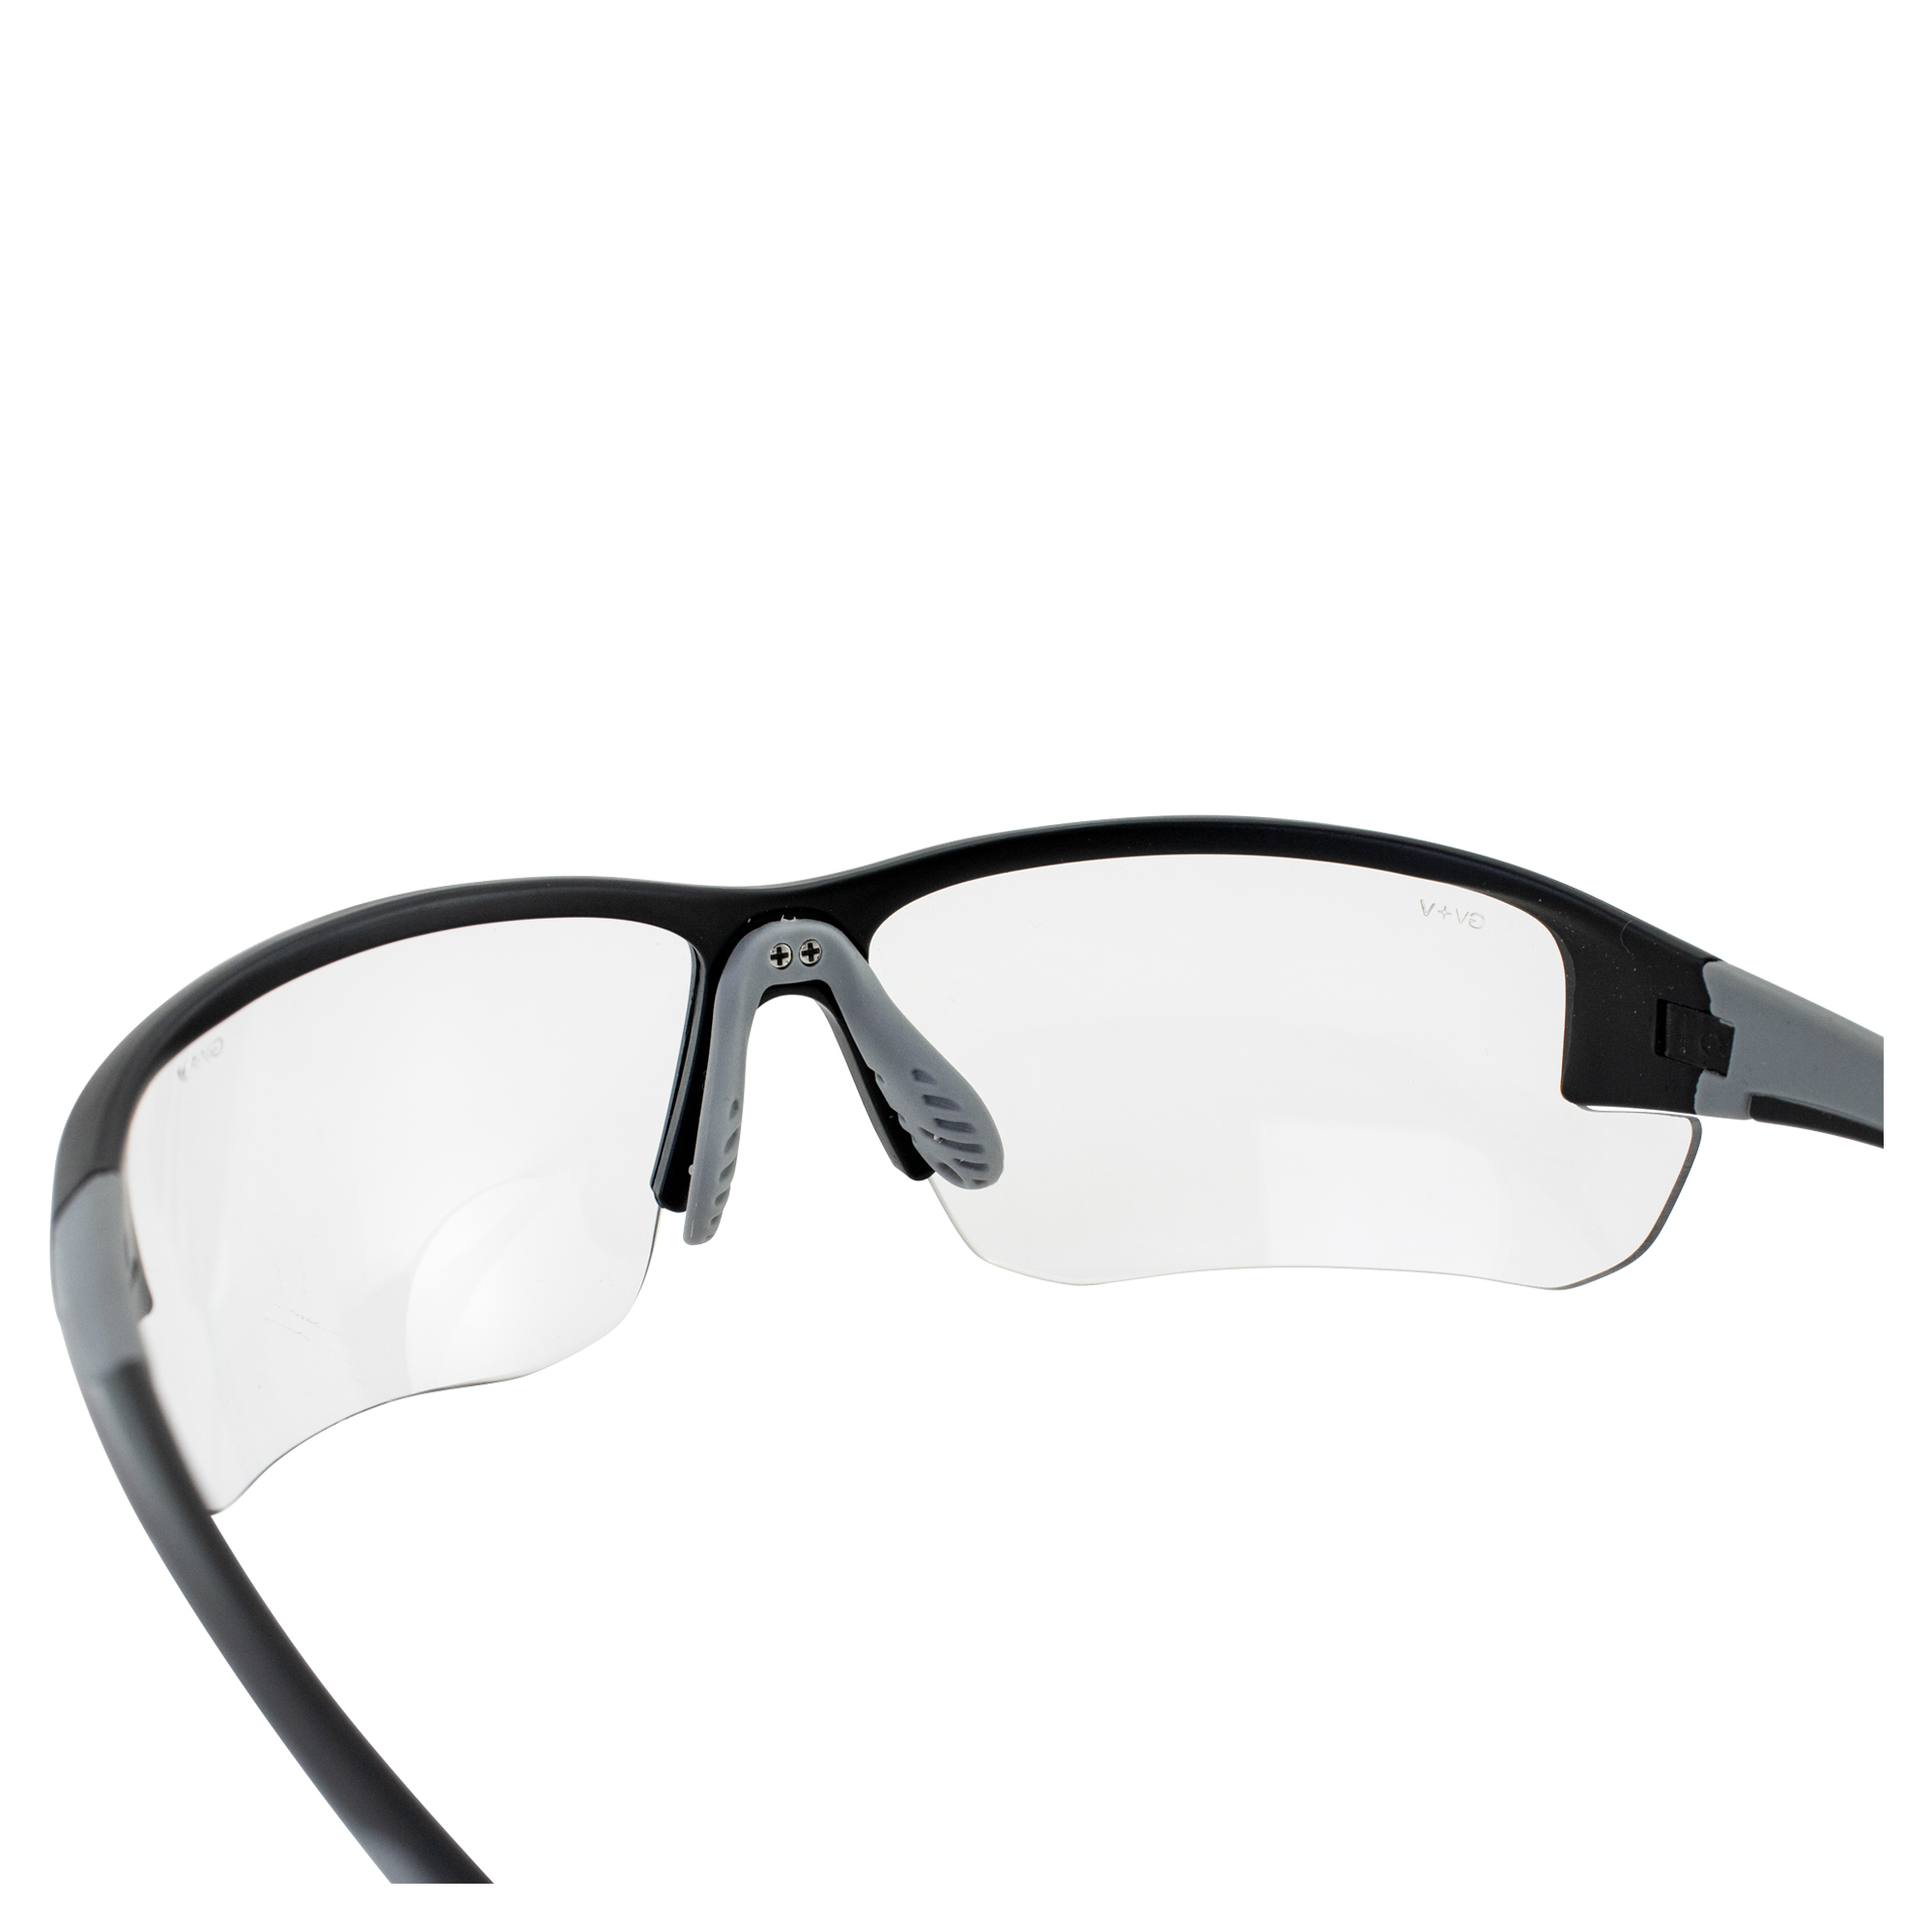 GLOBAL VISION HERCULES 7 Transition Lens Safety Glasses 1.5 Clear to Smoke  Z87.1 $43.95 - PicClick